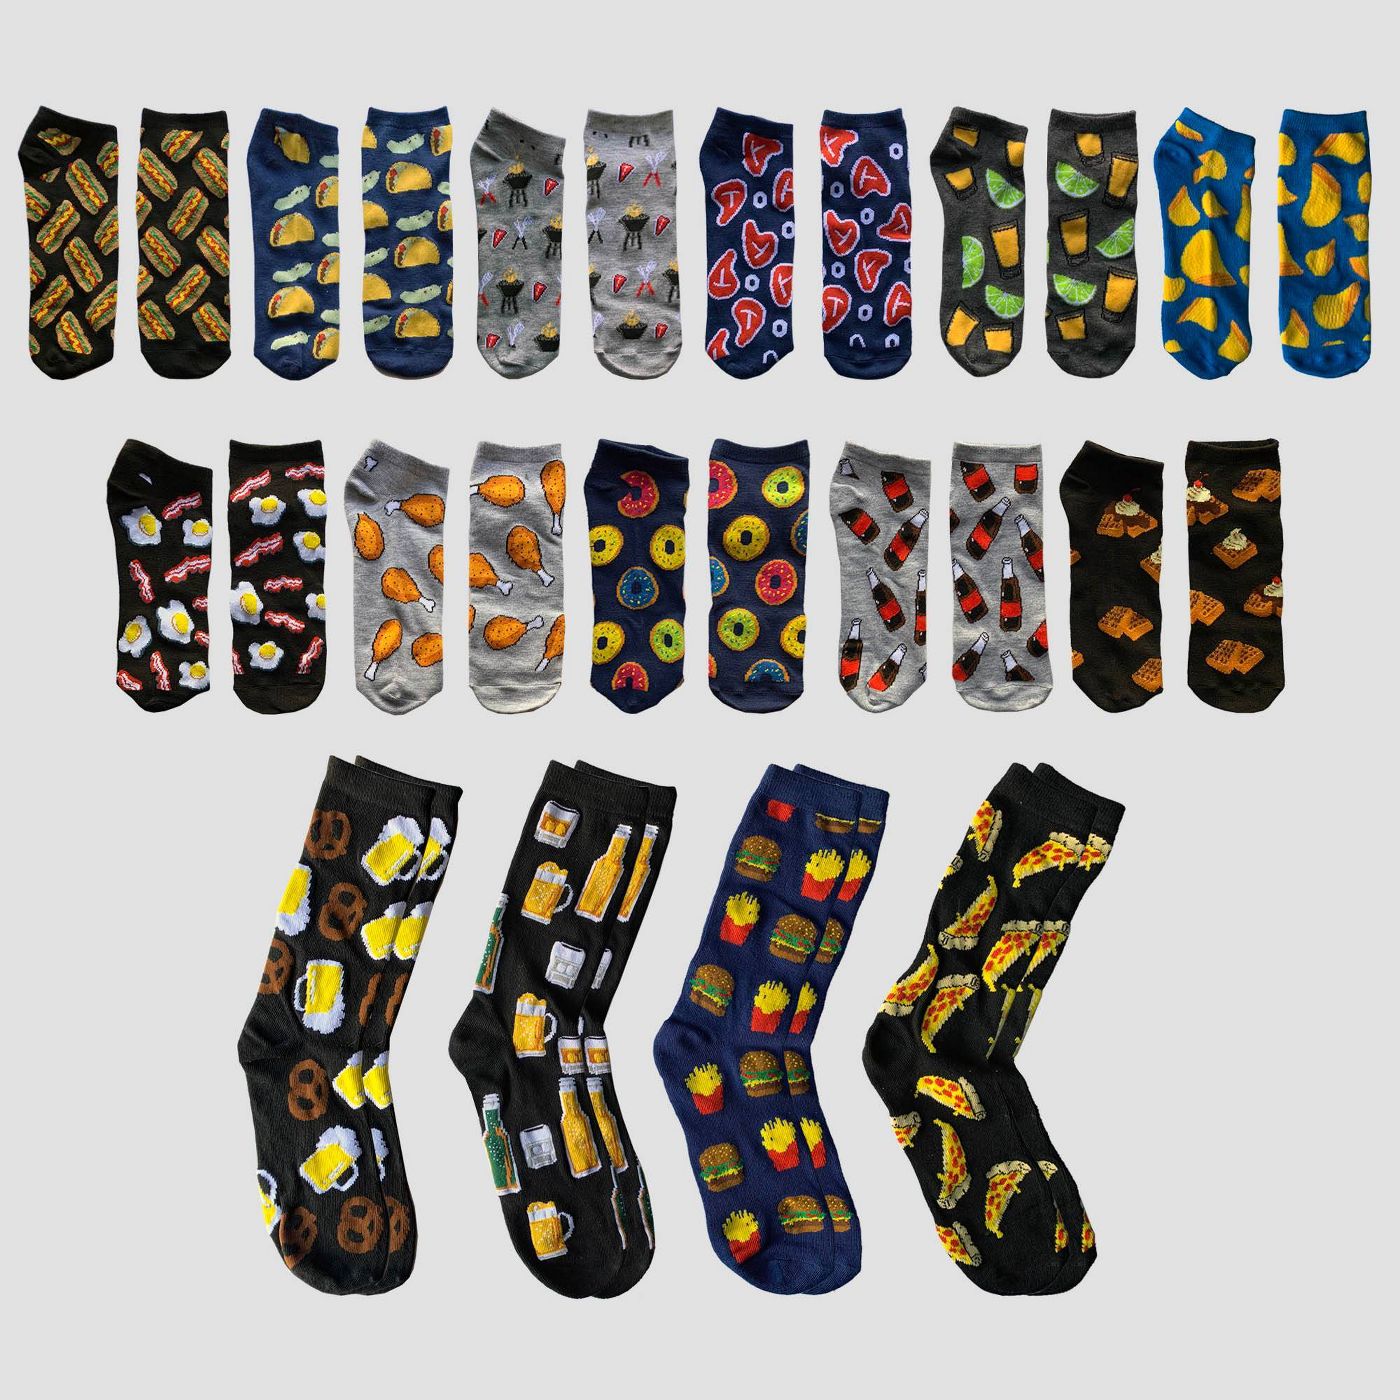 Target Sock Advent Calendars For Men Available Now! MSA